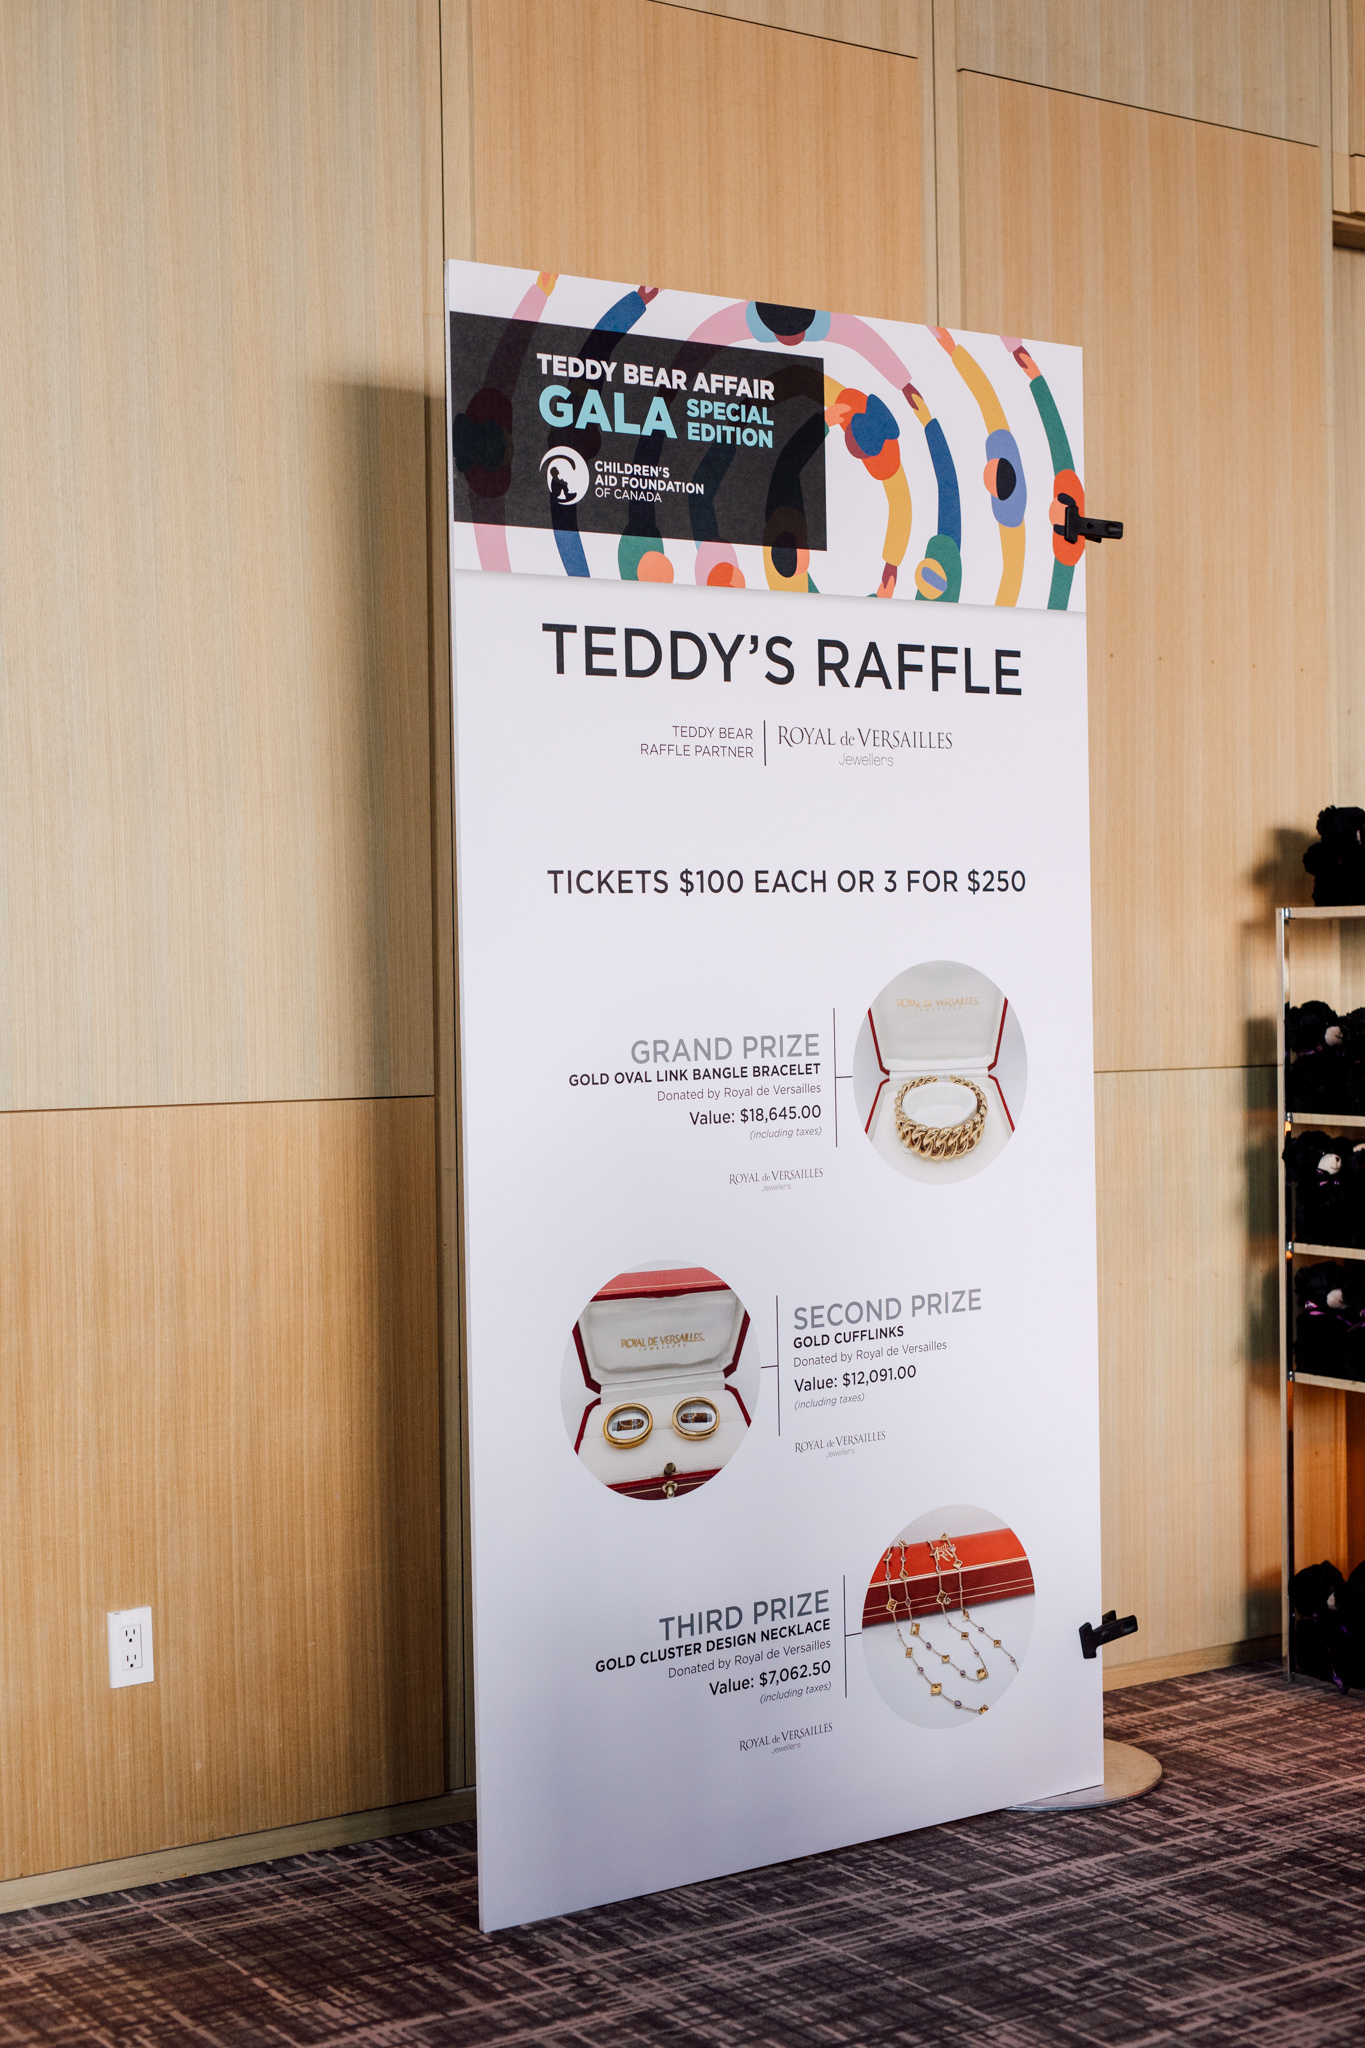 Teddy's raffle is a fun-filled event where participants have the chance to win incredible prizes.